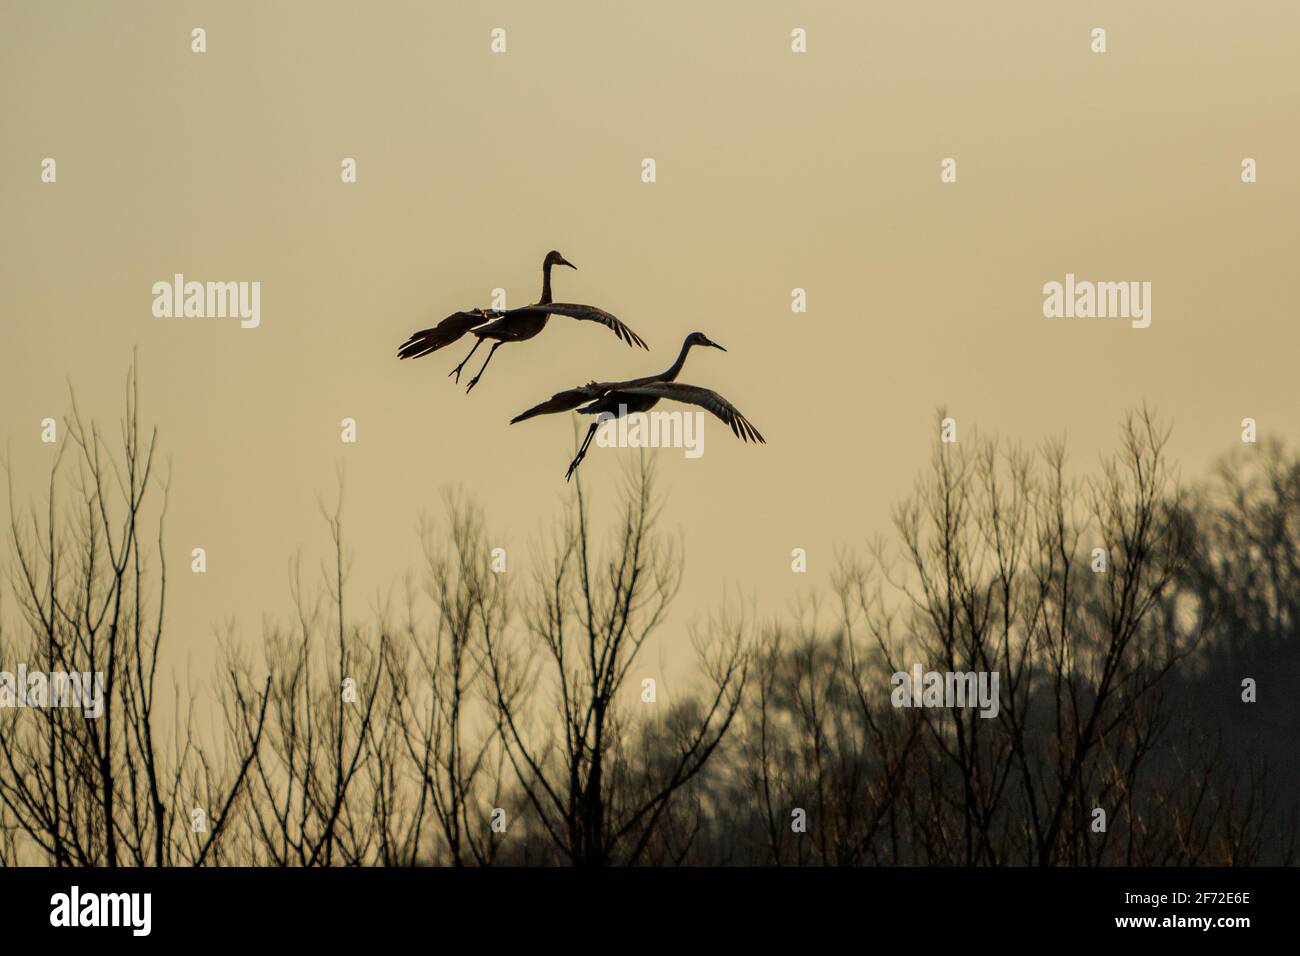 Flaps Down    Trumpeting cries announced their arrival to the nesting site. These paired Sandhill Cranes (Antigone canadensis) spent the day hunting a Stock Photo